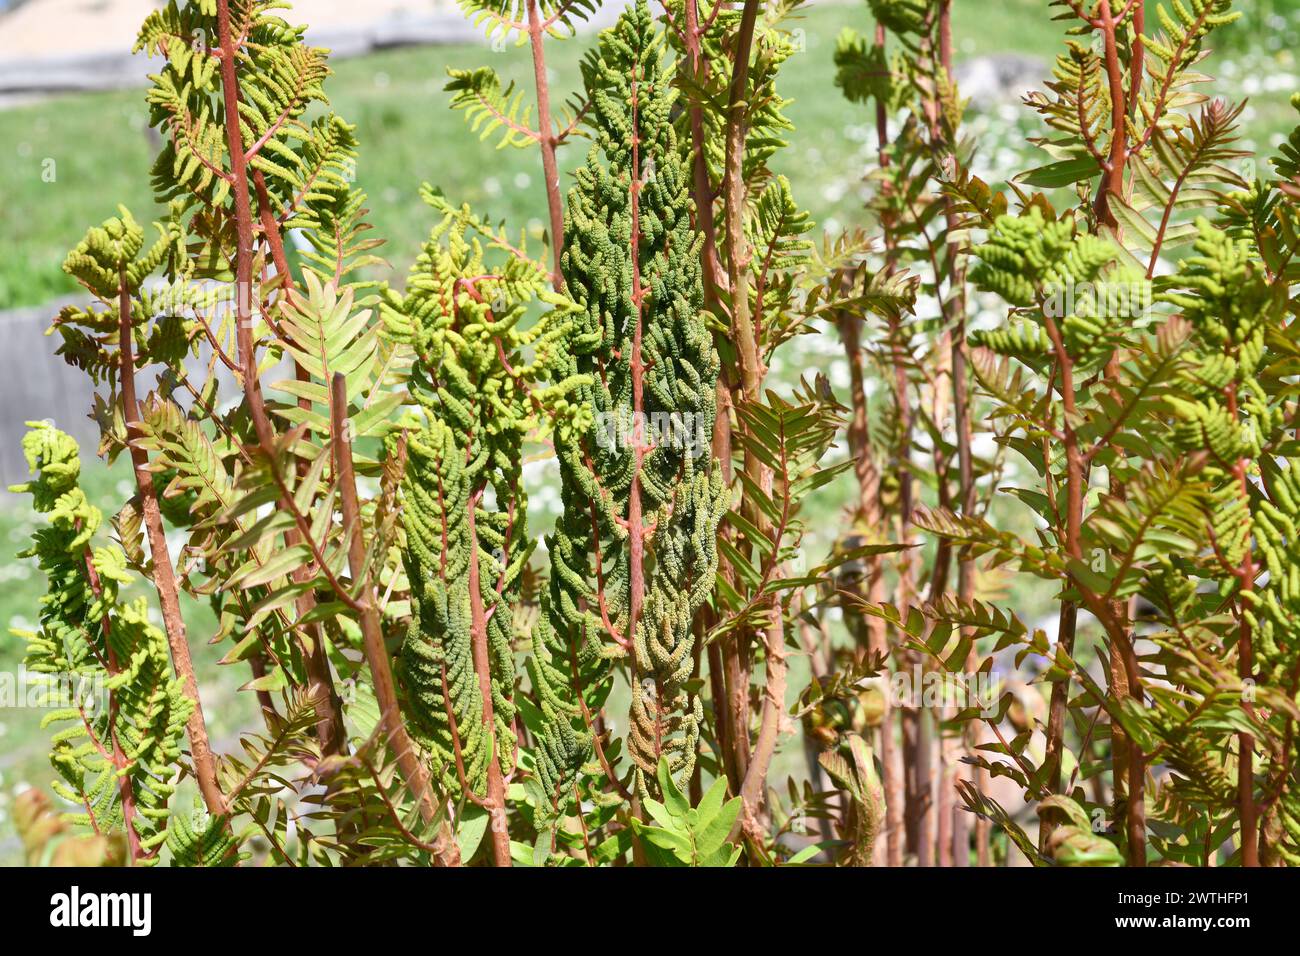 Royal fern (Osmunda regalis) is a perennial herb native to Eurasia and Africa. This photo was taken in Aquitaine, France. Stock Photo